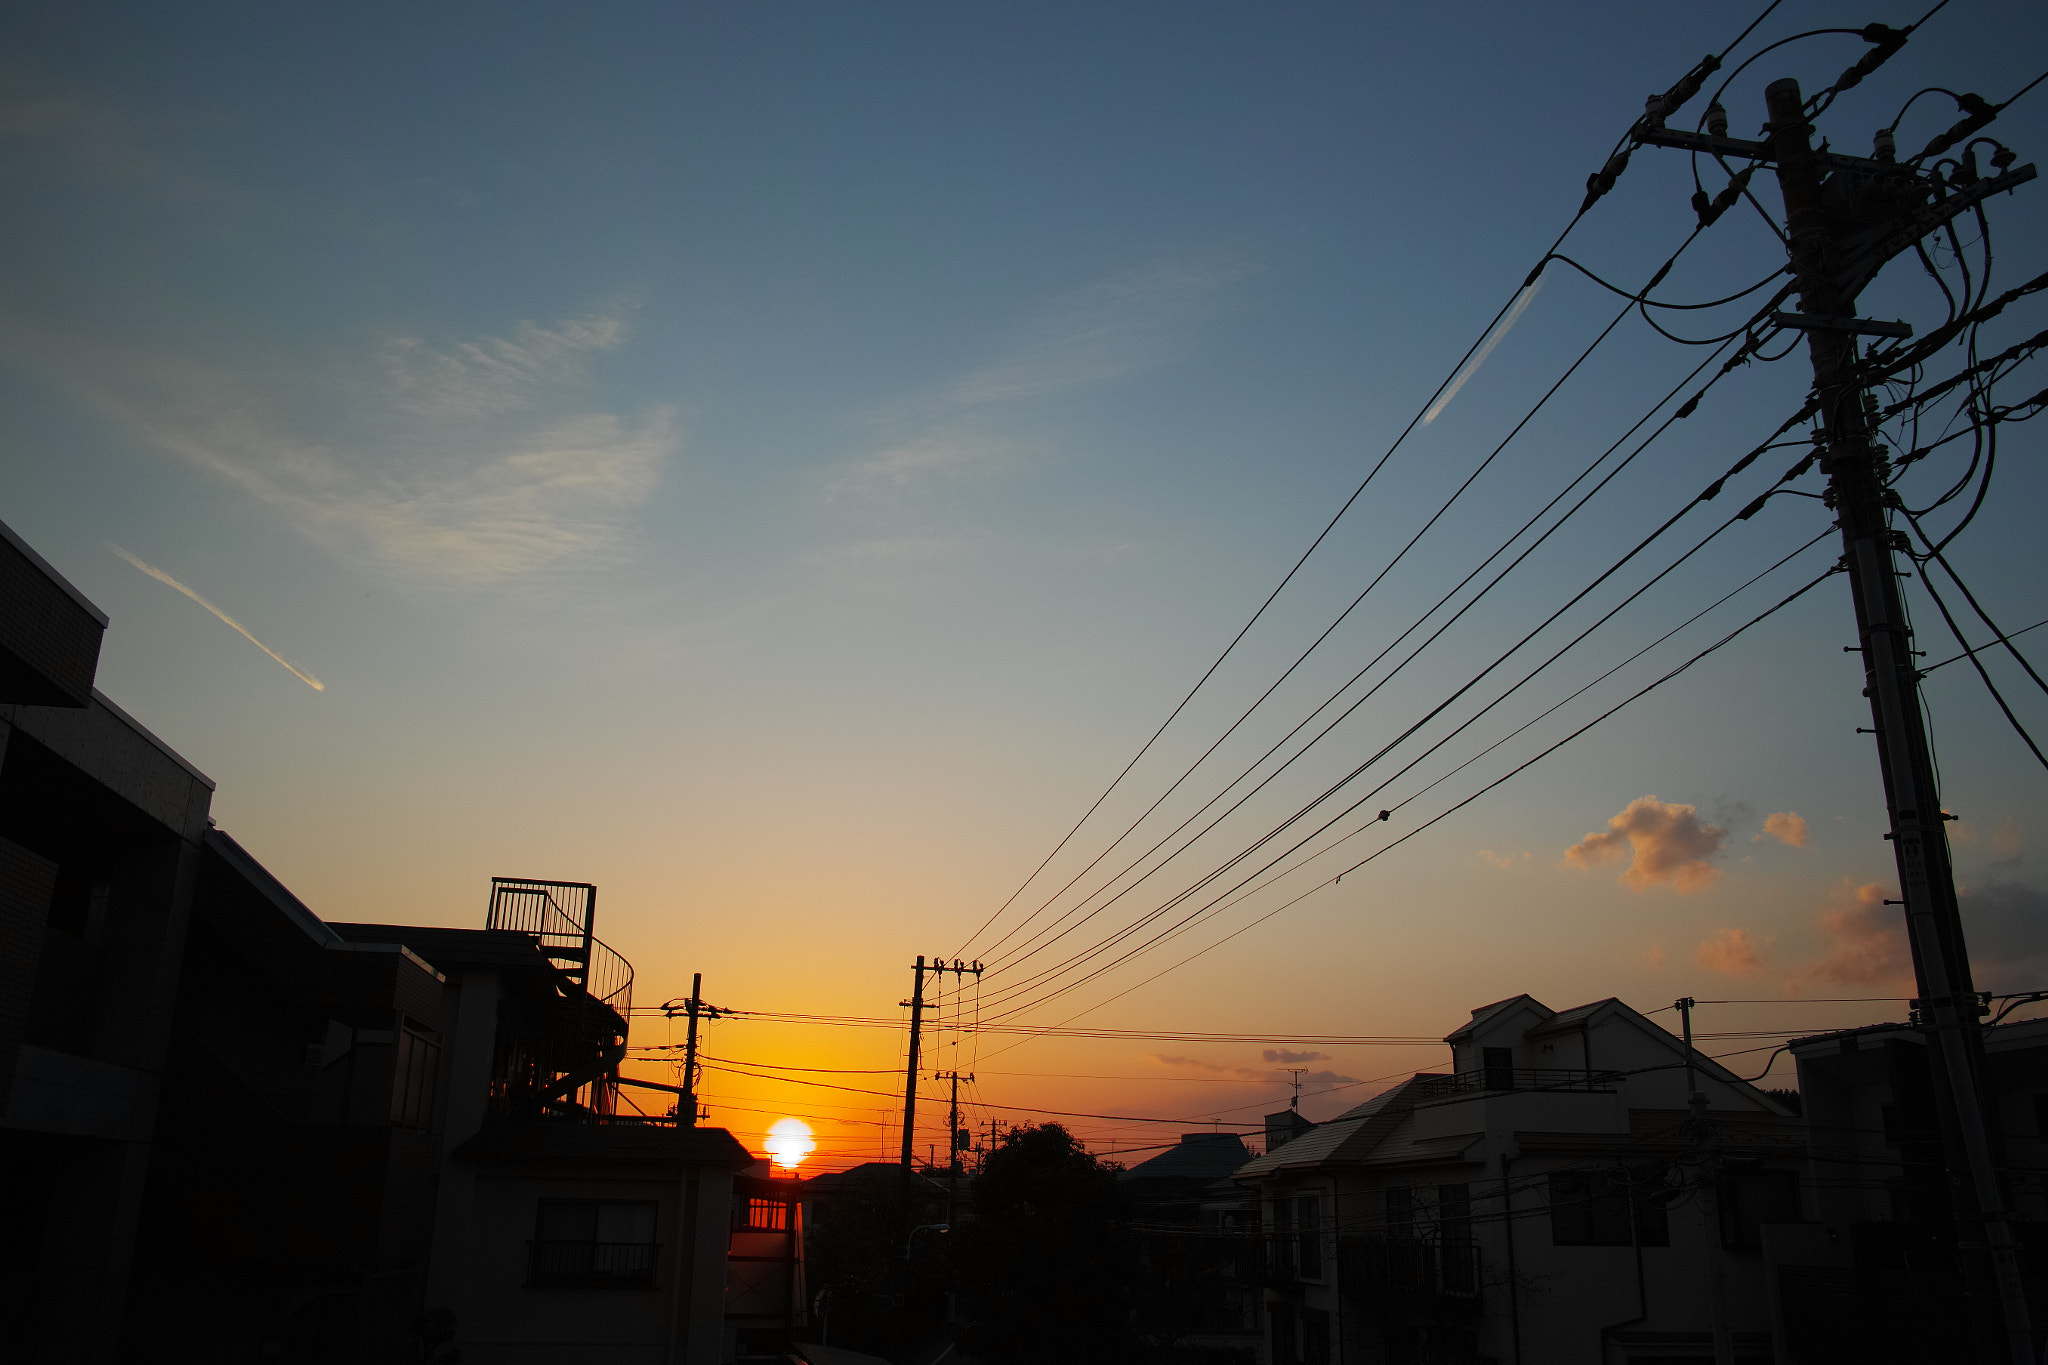 Sigma dp1 Quattro sample photo. Sunset in my town photography